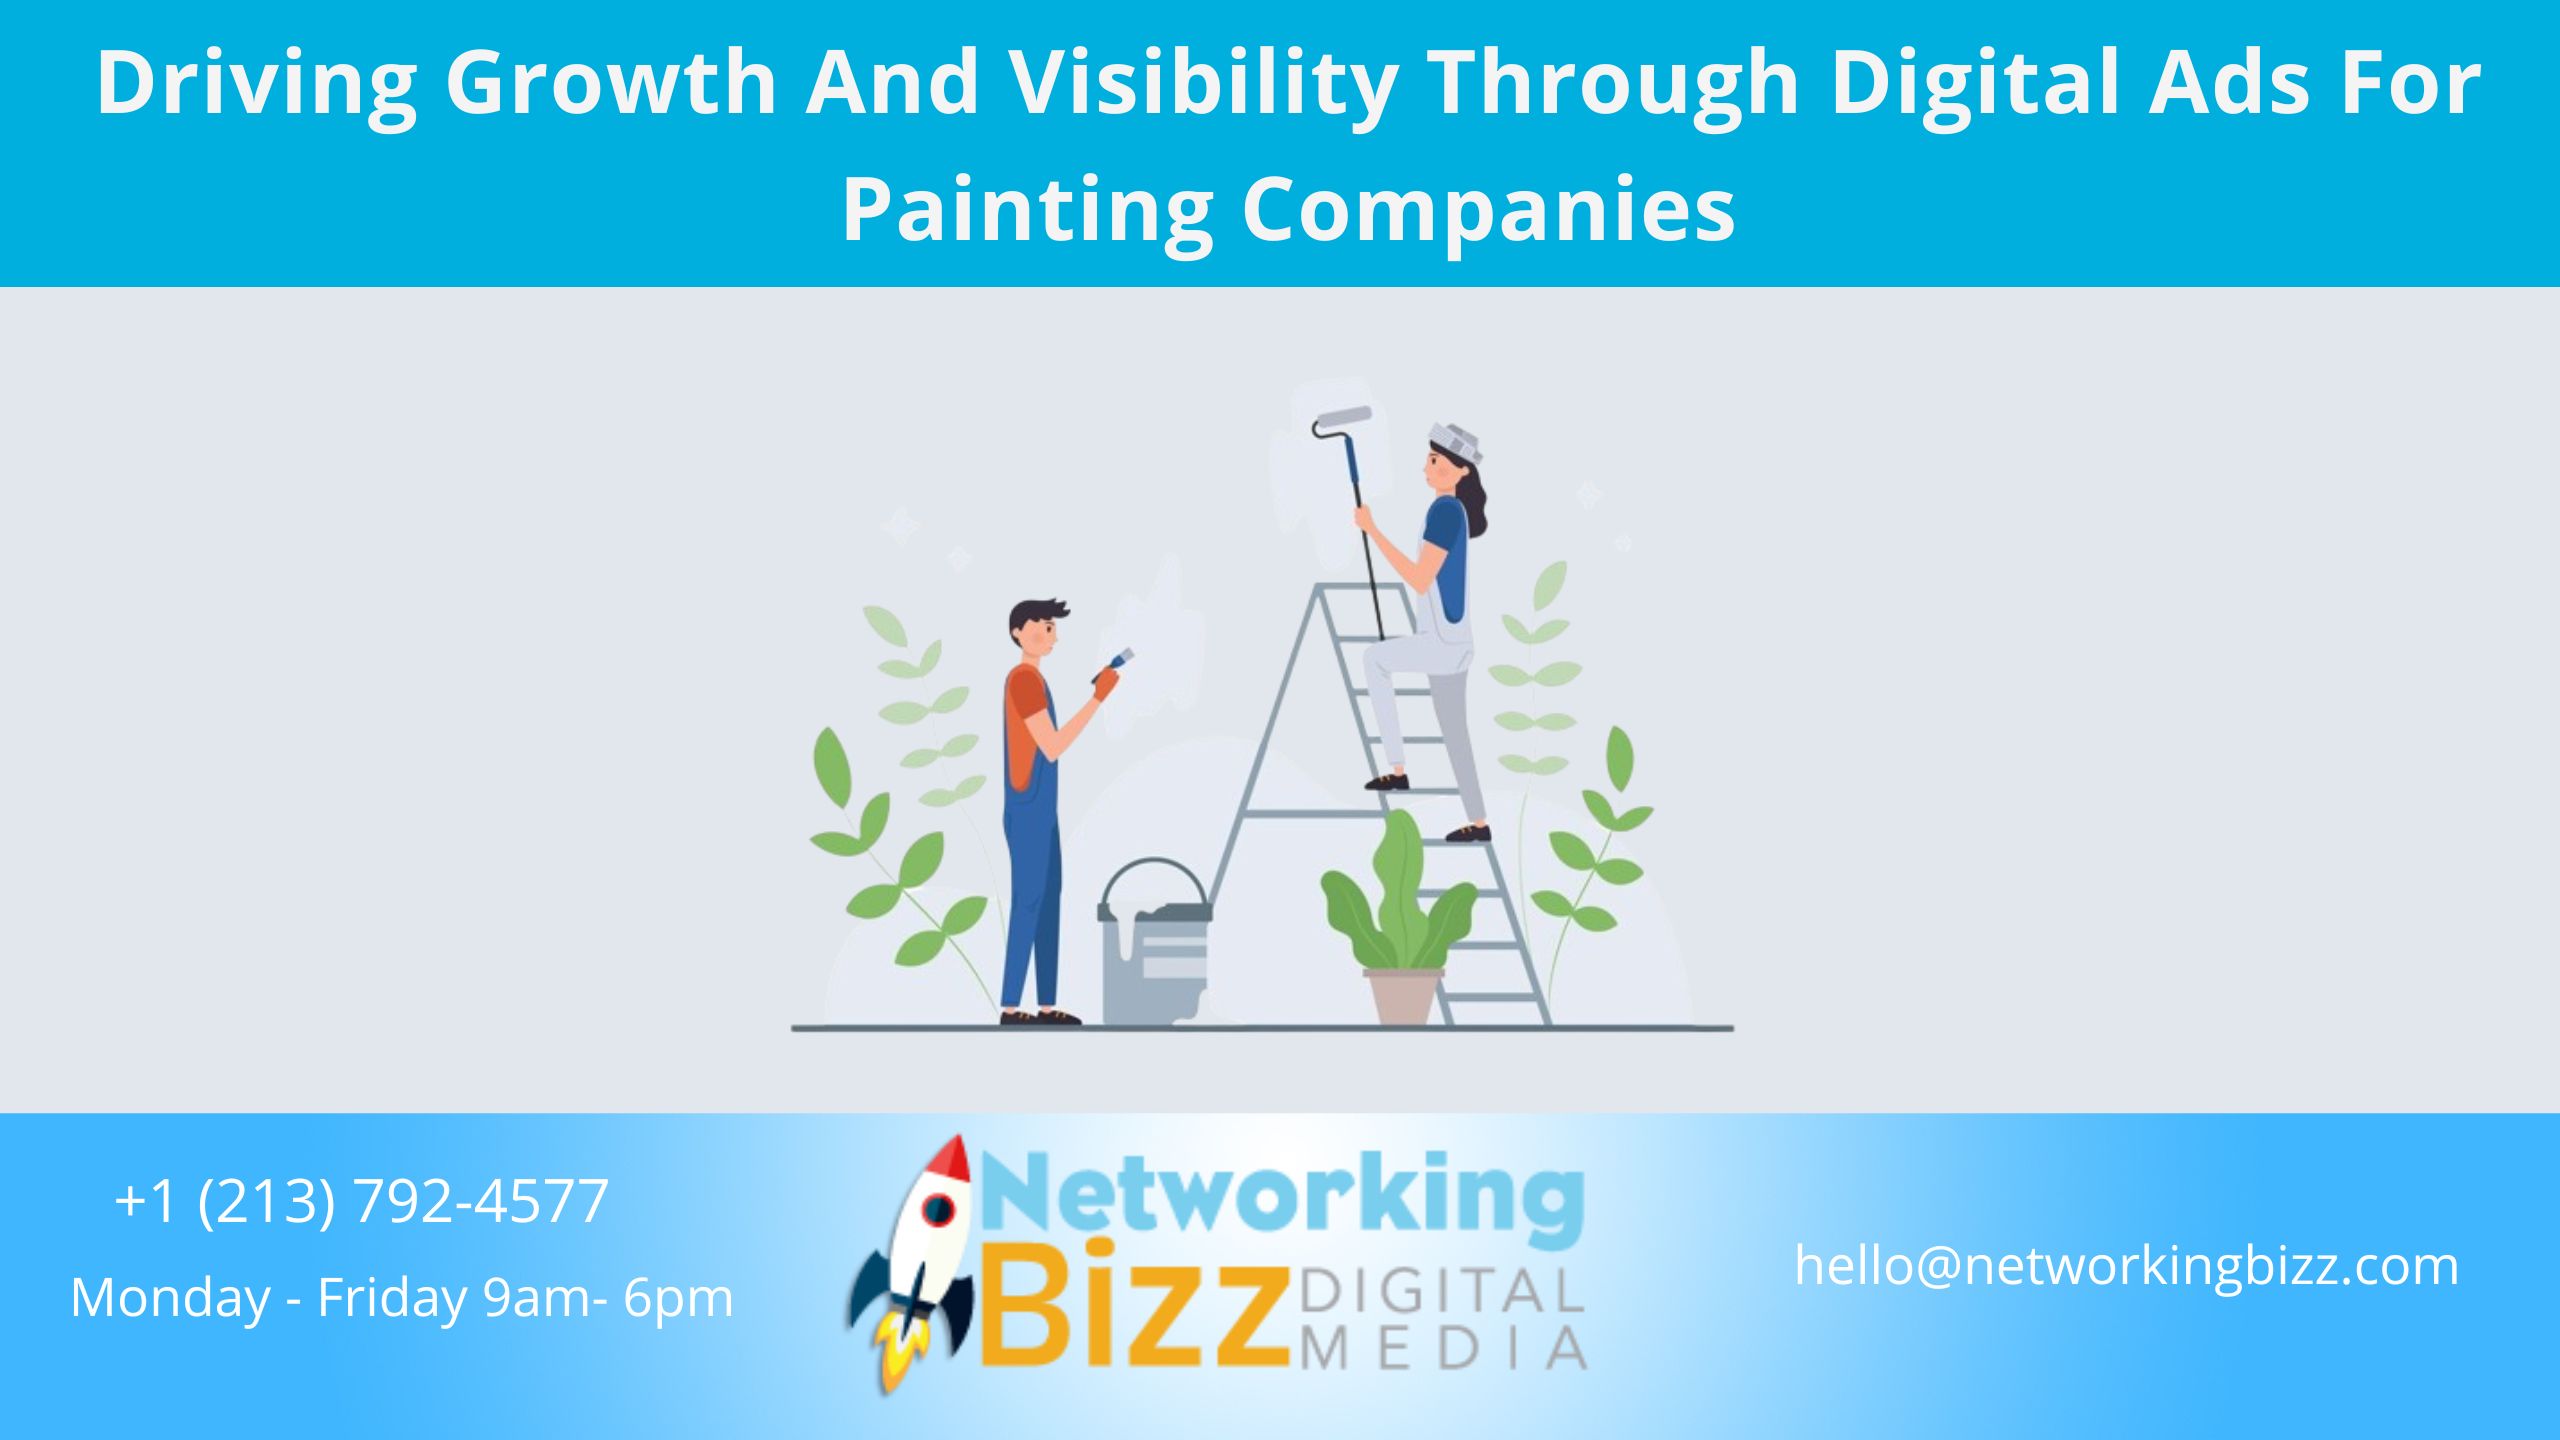 Driving Growth And Visibility Through Digital Ads For Painting Companies